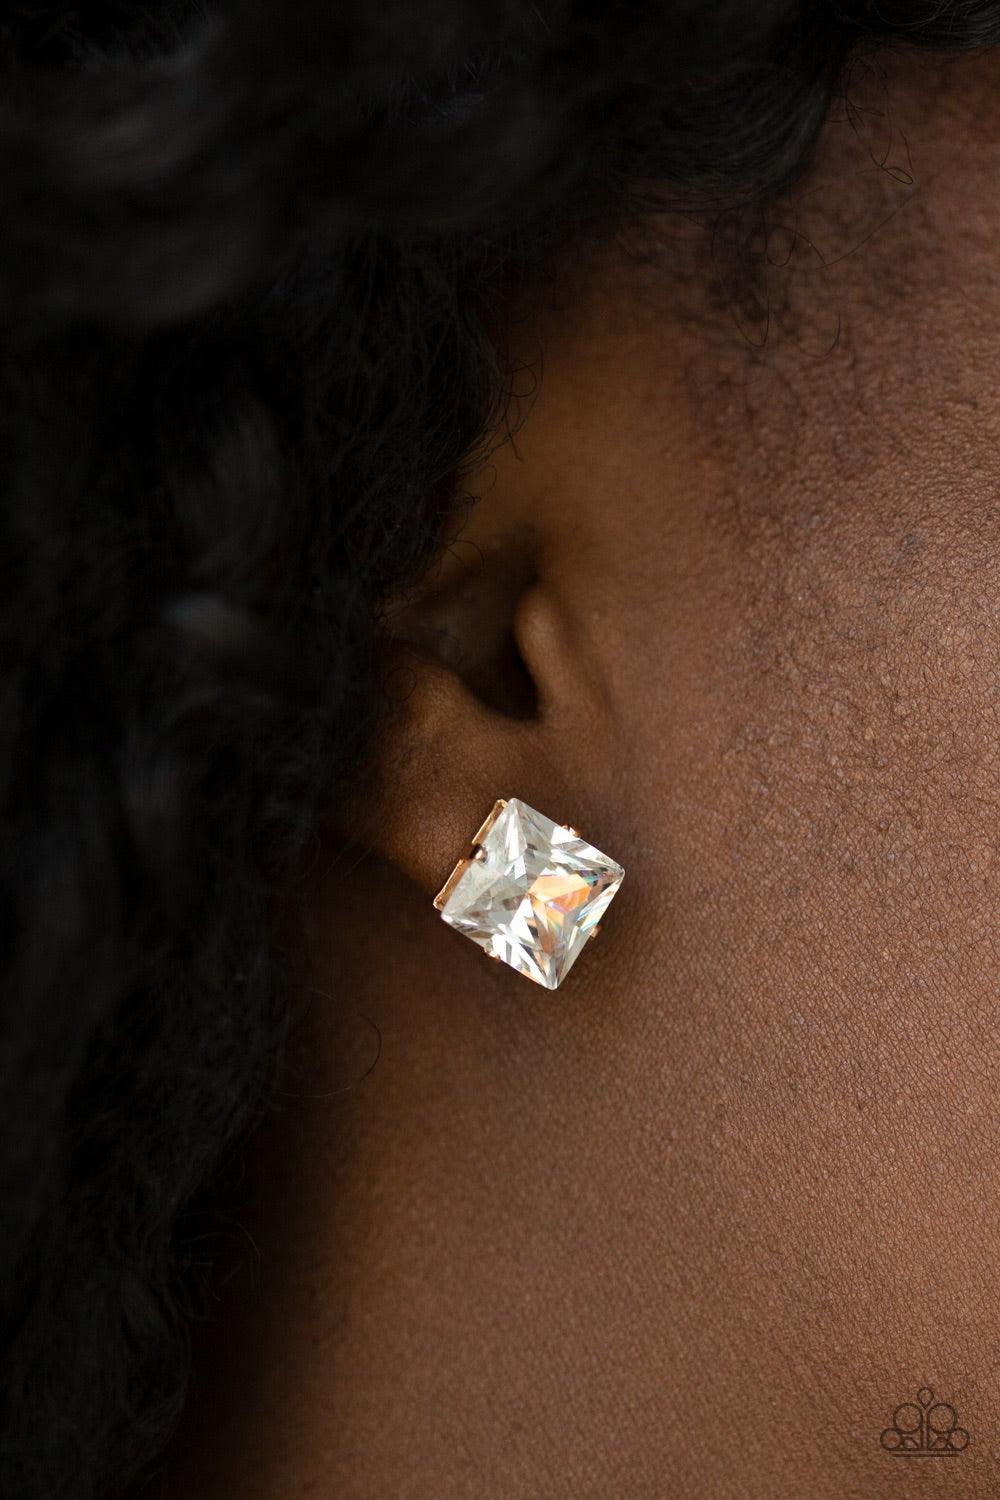 Paparazzi Accessories Prima Donna Drama - Gold Featuring a regal princess style cut, an oversized white gem sits atop a classic gold frame in a dramatic finish. Earring attaches to a standard post fitting. Jewelry